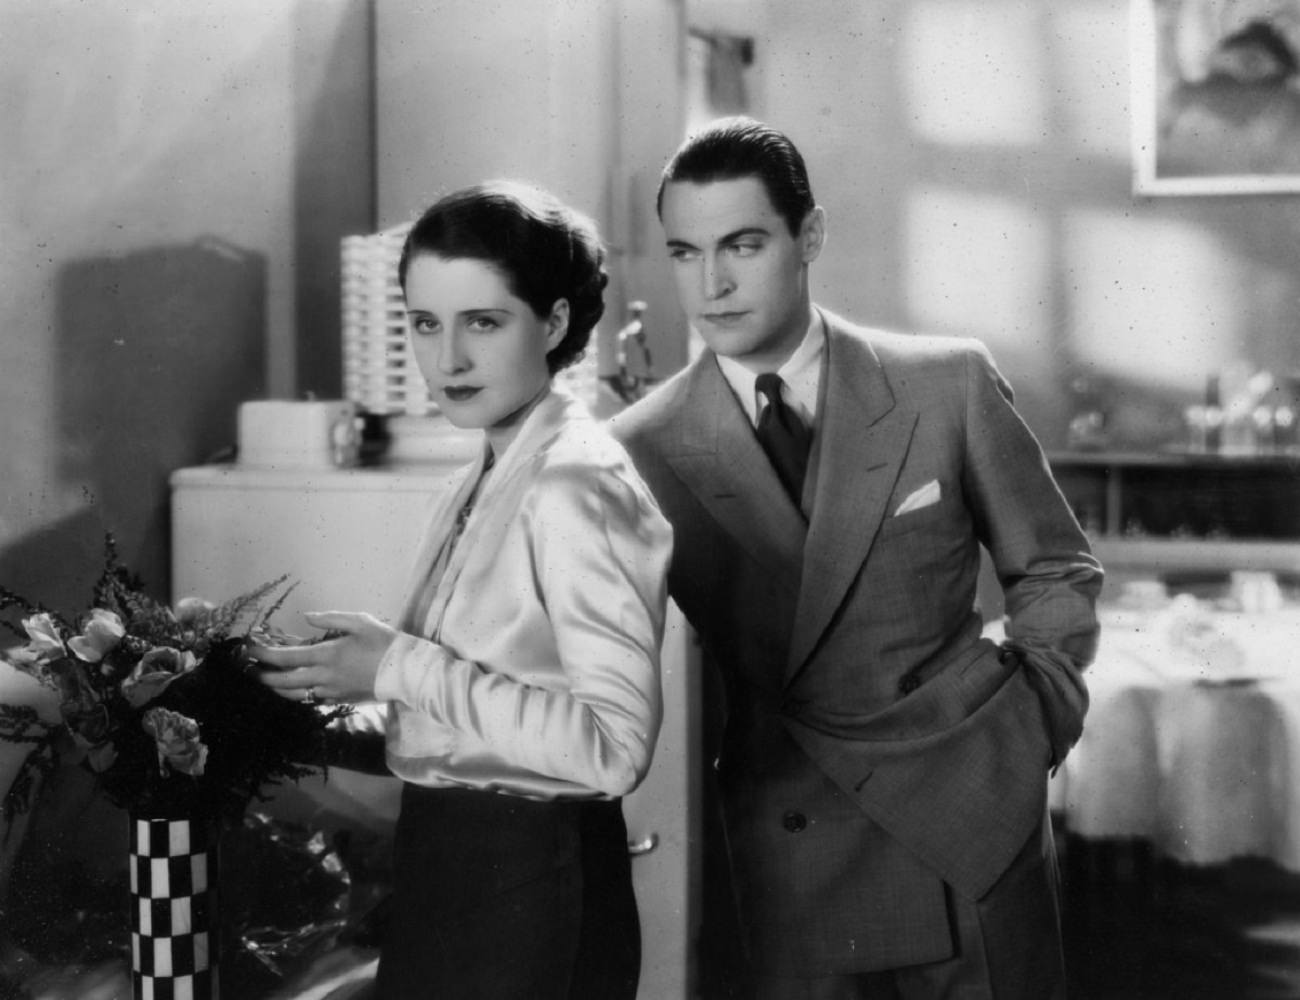 Norma Shearer and Chester Morris in The divorcee, 1930